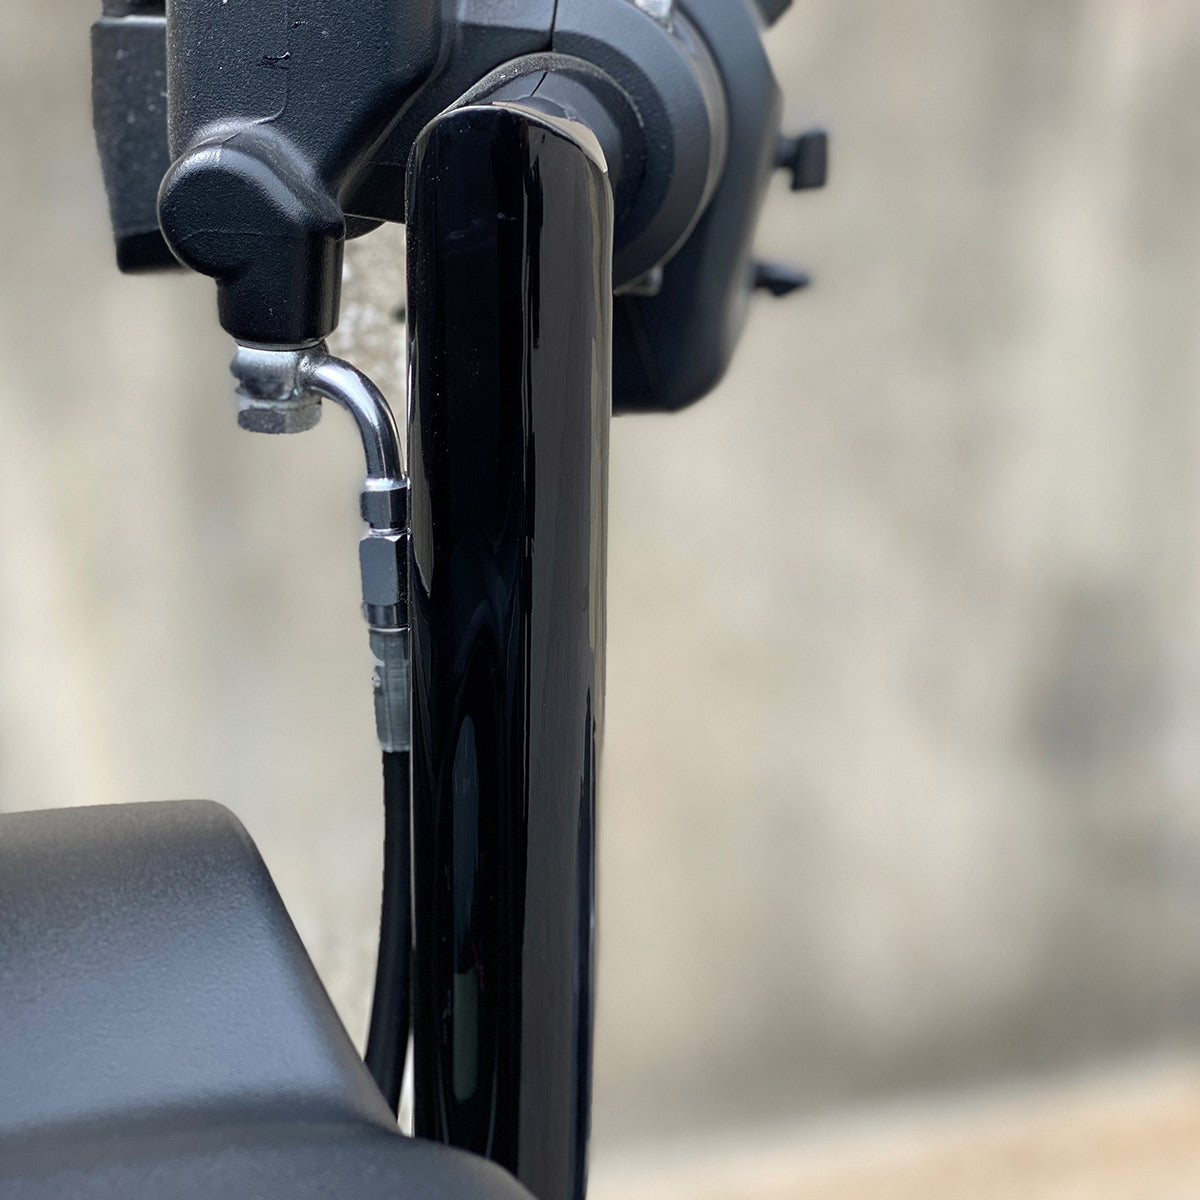 12" Black Ergo Bars for 2018-2020 Indian® Chieftain, Roadmaster and Dark Horse Motorcycles